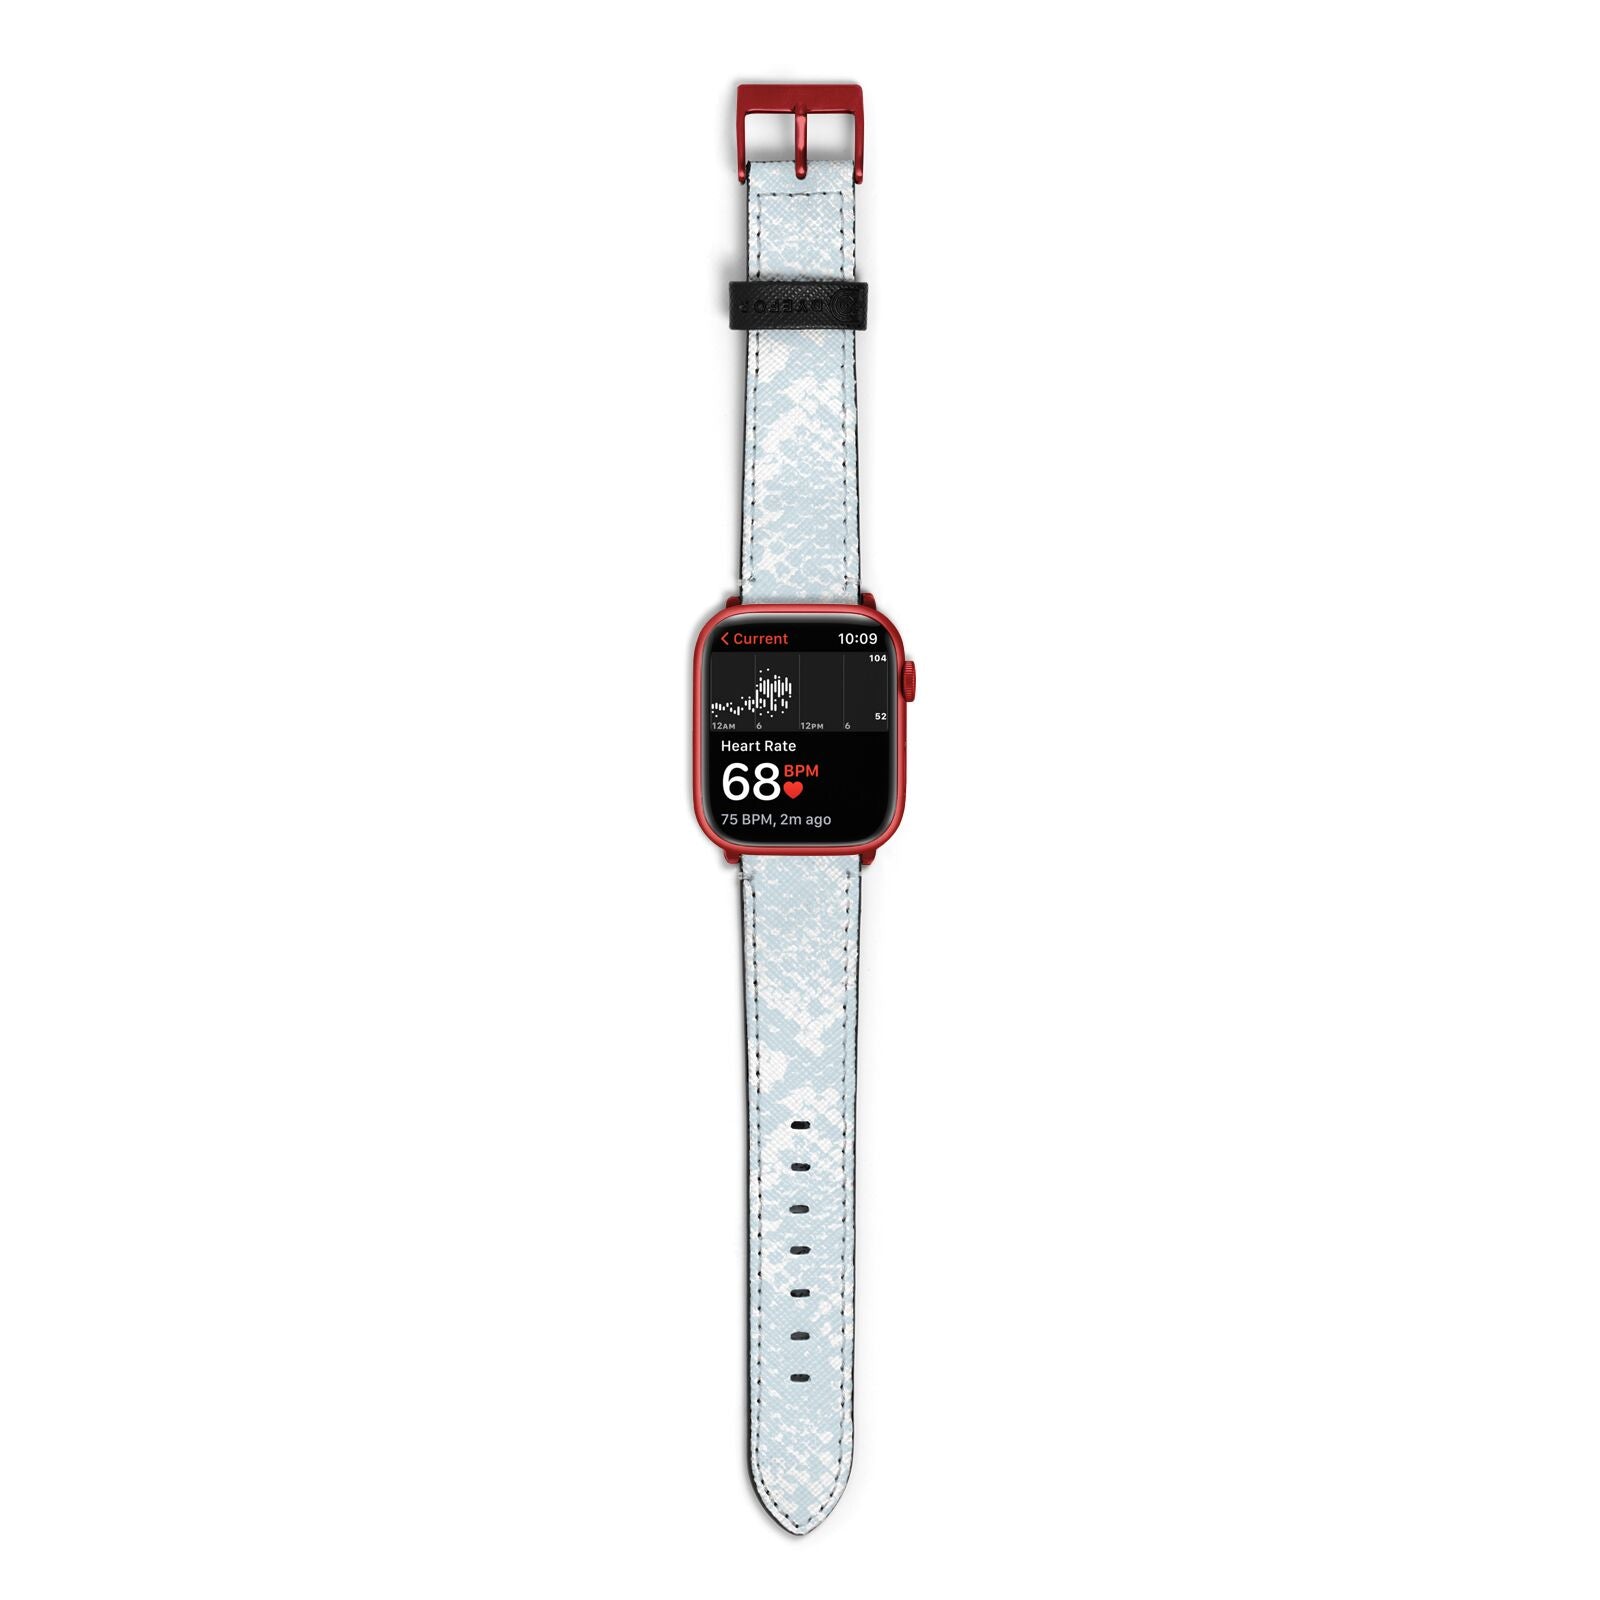 Sky Blue Snakeskin Apple Watch Strap Size 38mm with Red Hardware